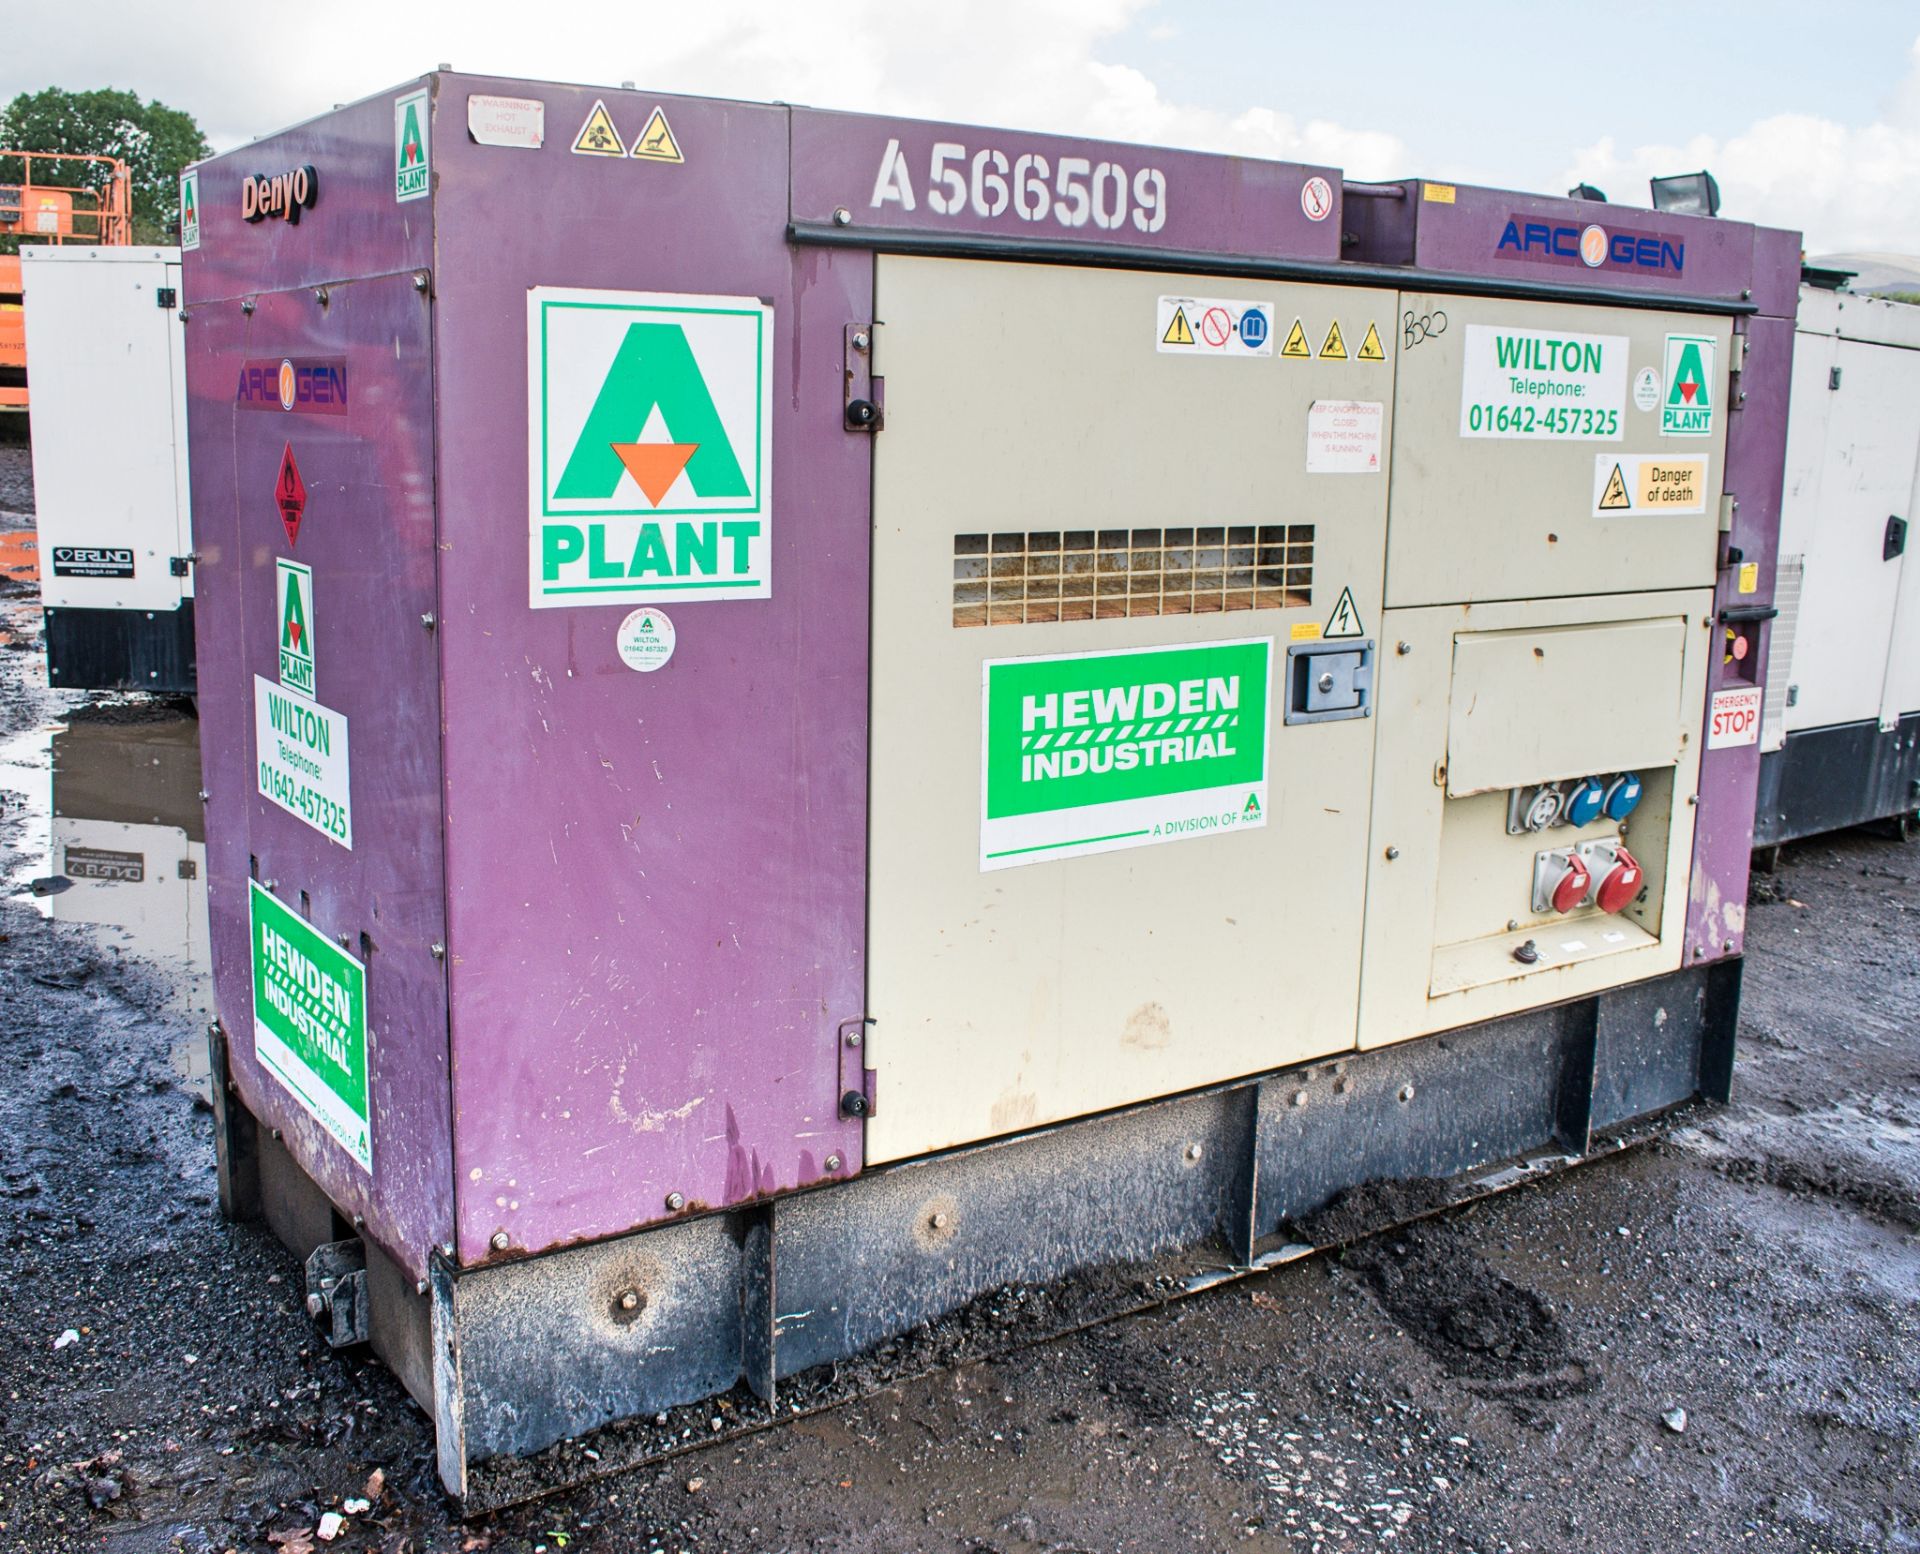 Denyo DCA-70 50 kva diesel driven generator Year: 2011 S/N: 3849695 Recorded Hours: 13,816 A566509 - Image 2 of 8